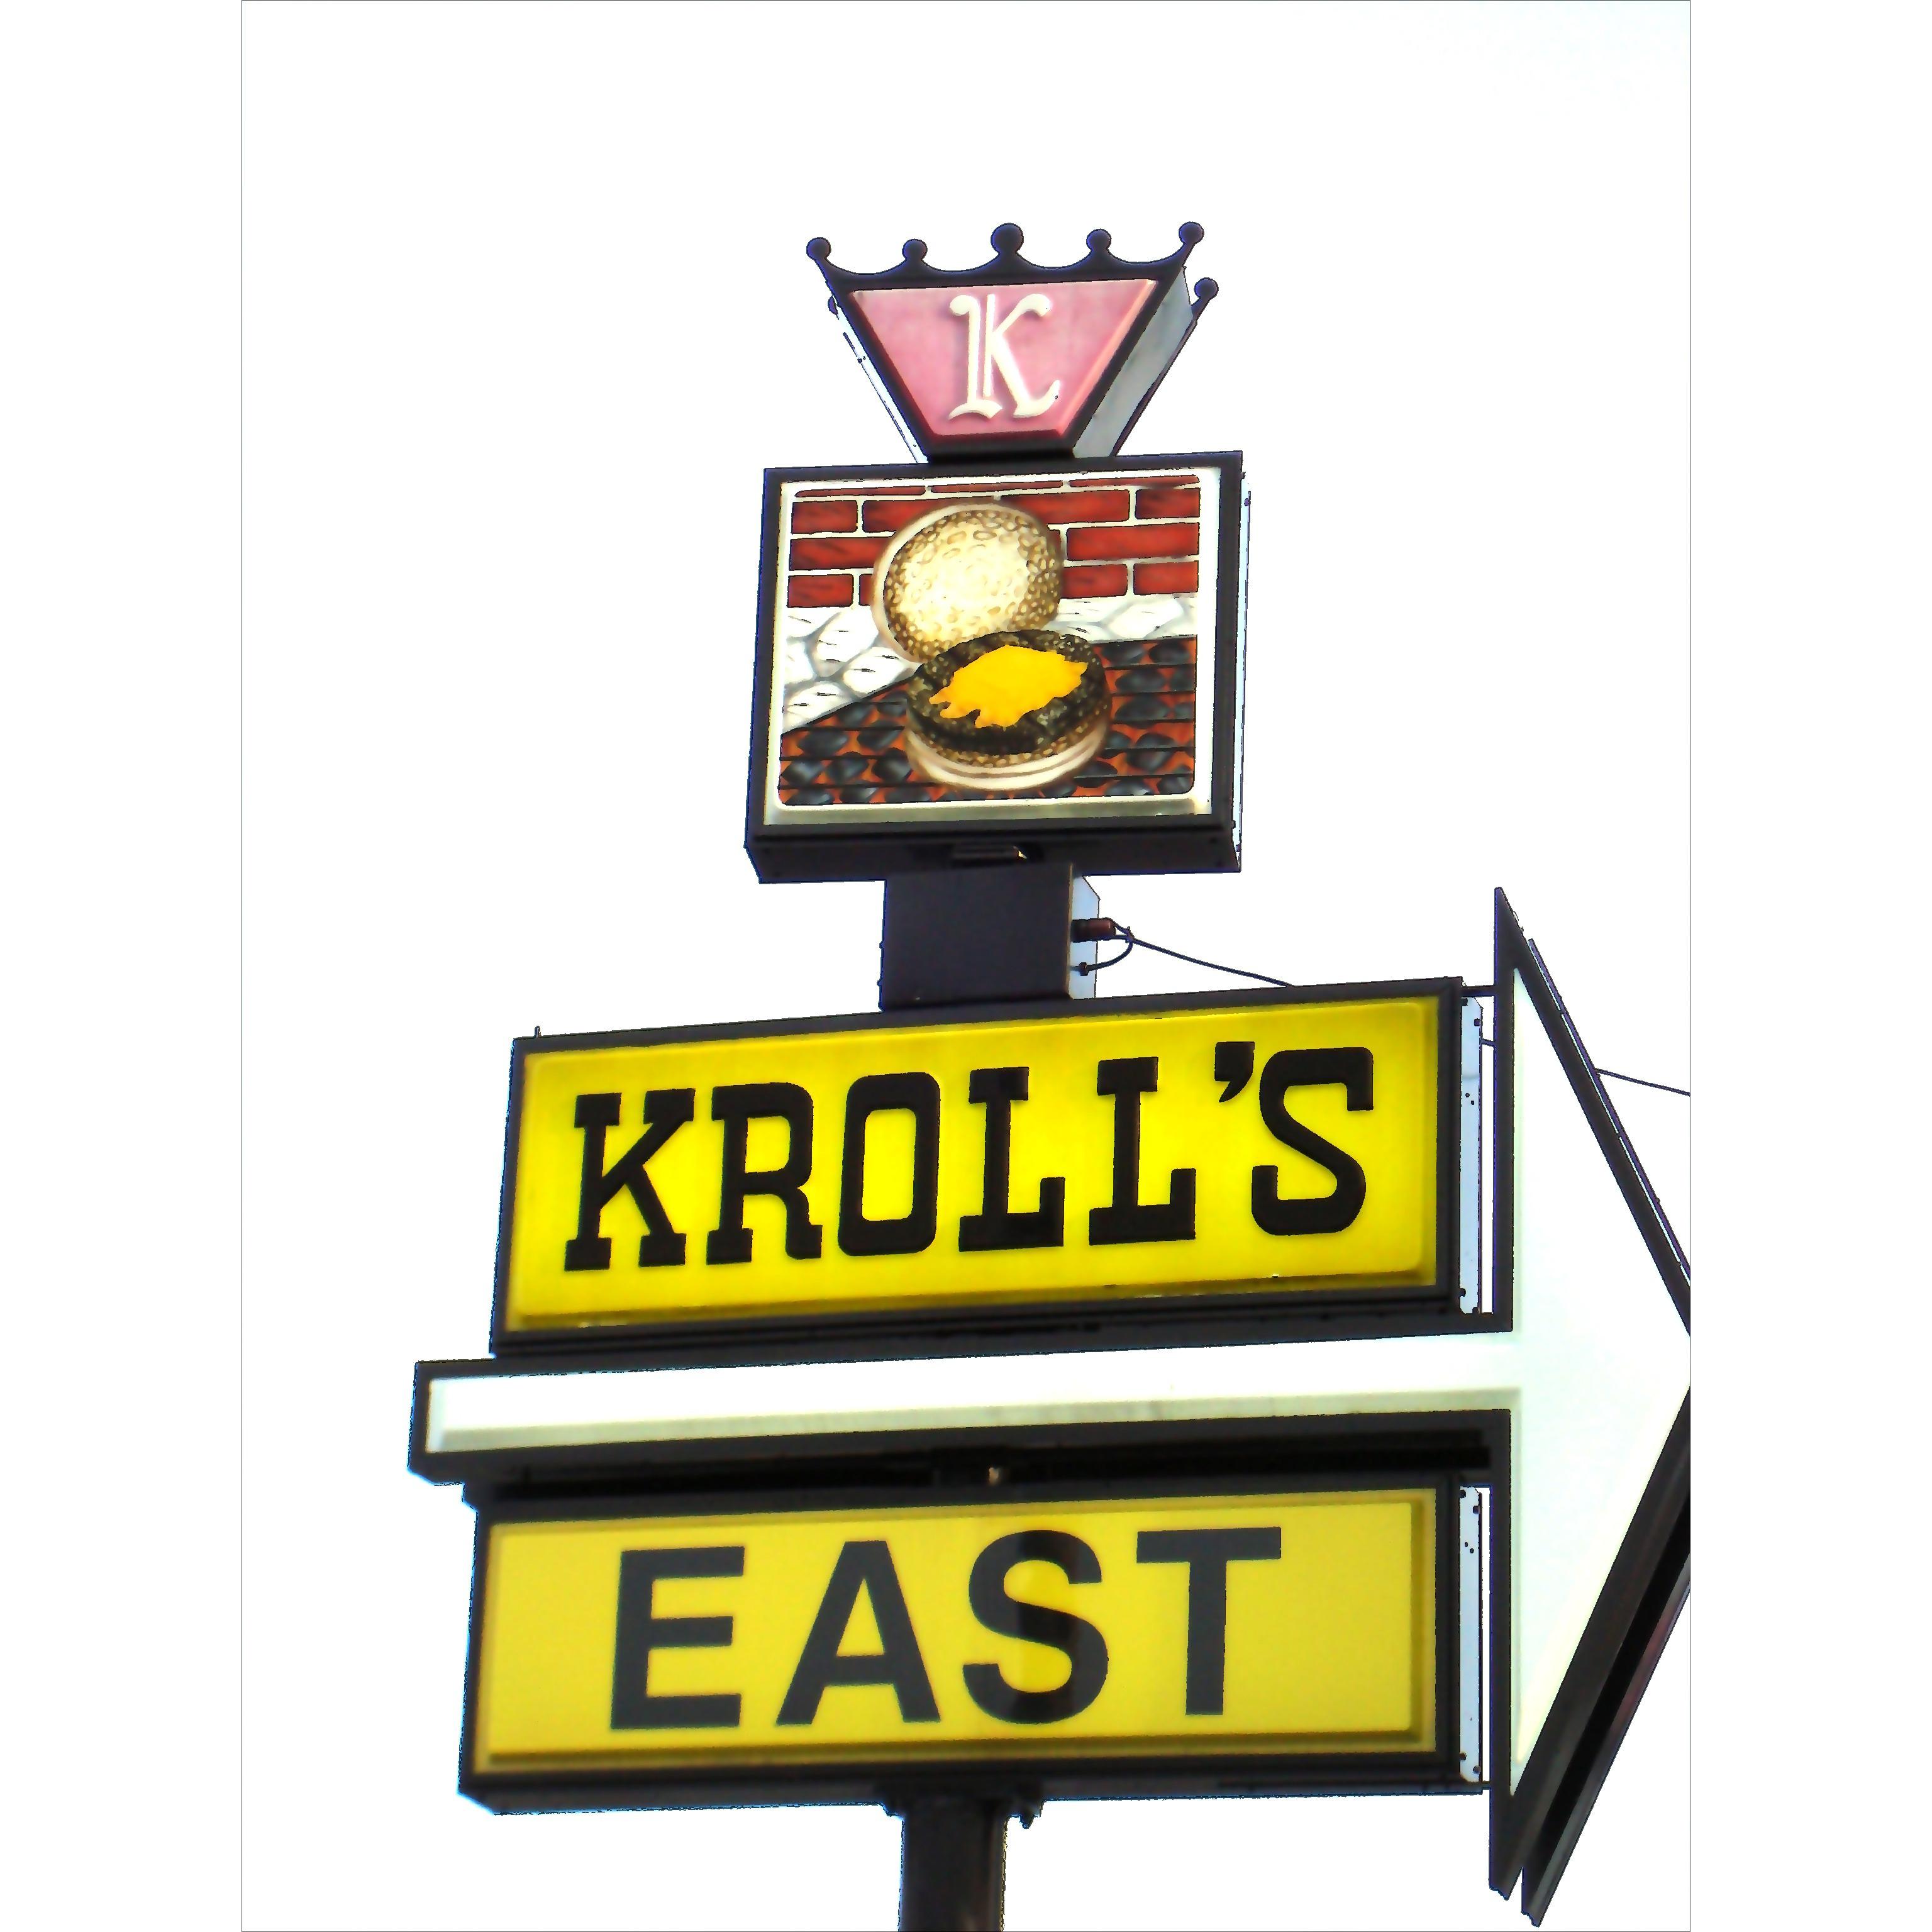 Kroll's East - Green Bay, WI 54302 - (920)468-4422 | ShowMeLocal.com